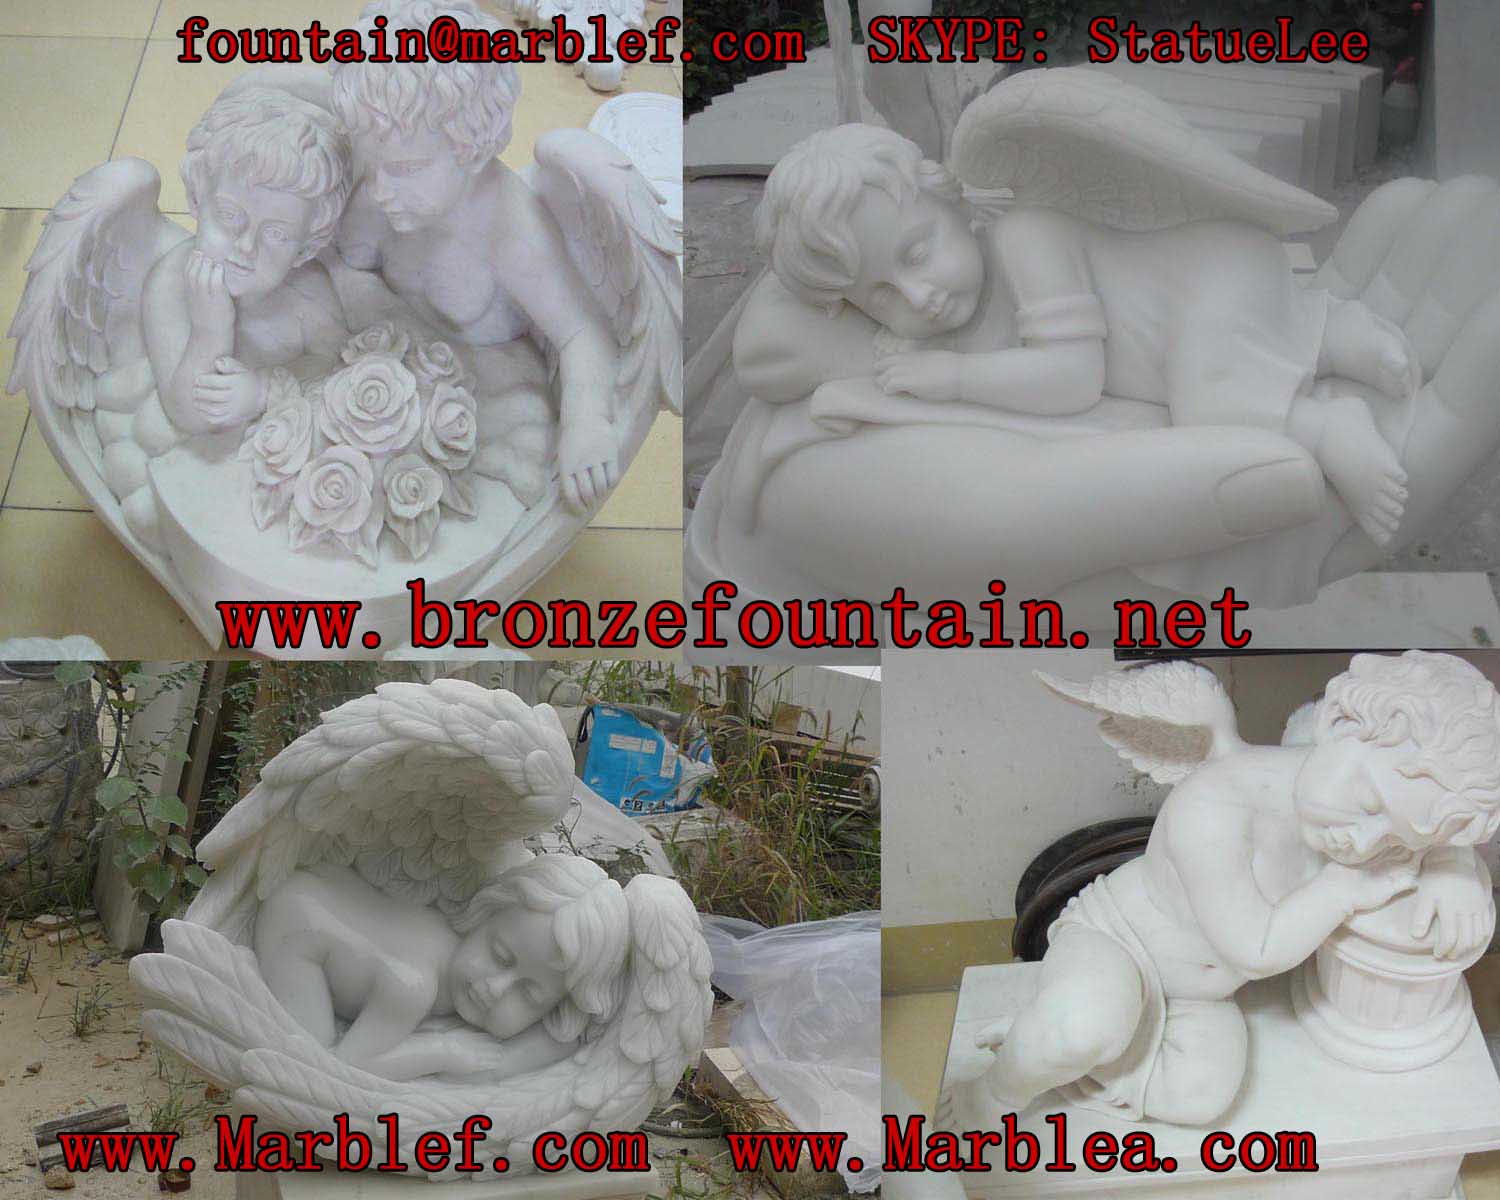 cast stone fountains,marble outdoor fountains,marble large outdoor fountains